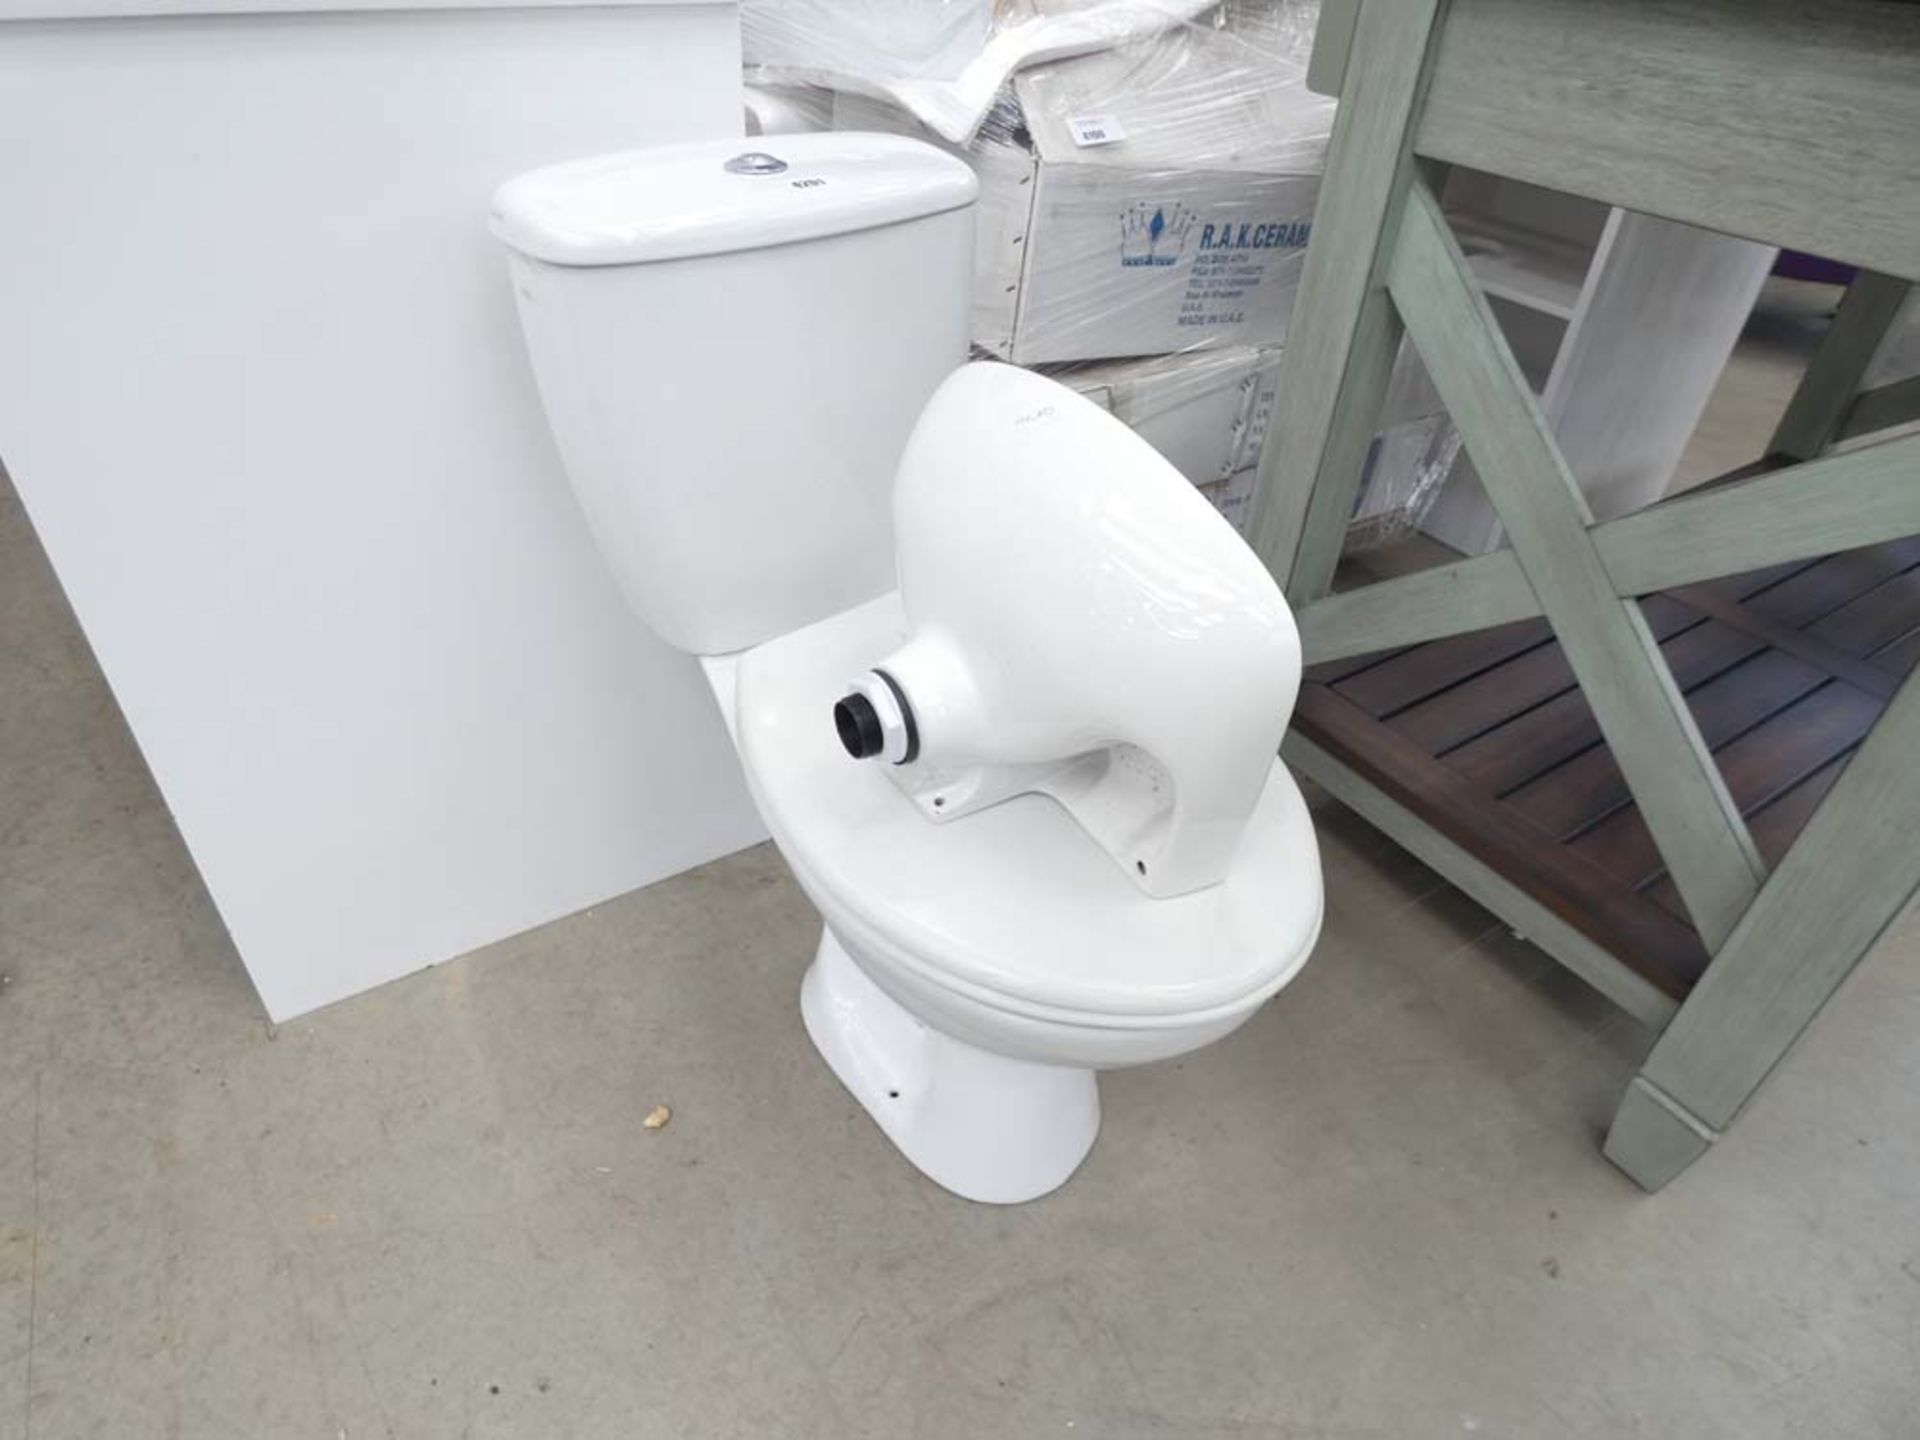 Toilet pan, cistern and small cloakroom sink